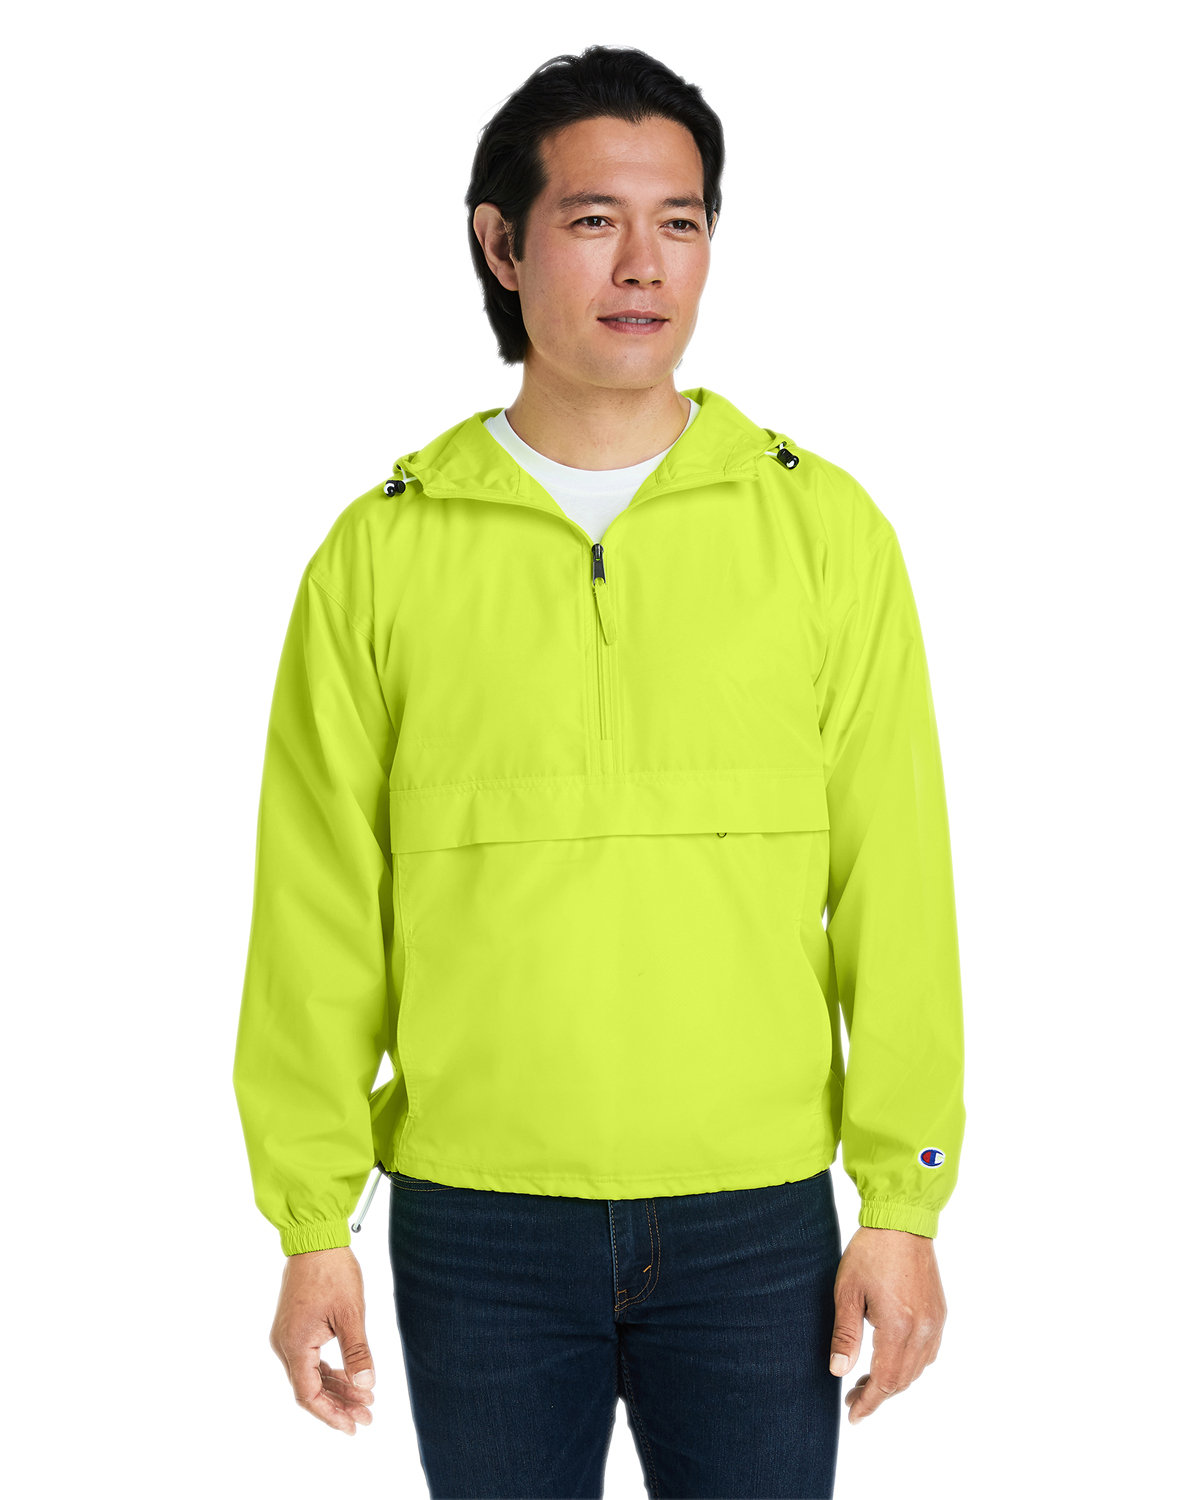 Champion CO200 Adult Packable Anorak 1/4 Zip Jacket - Safety Green - S